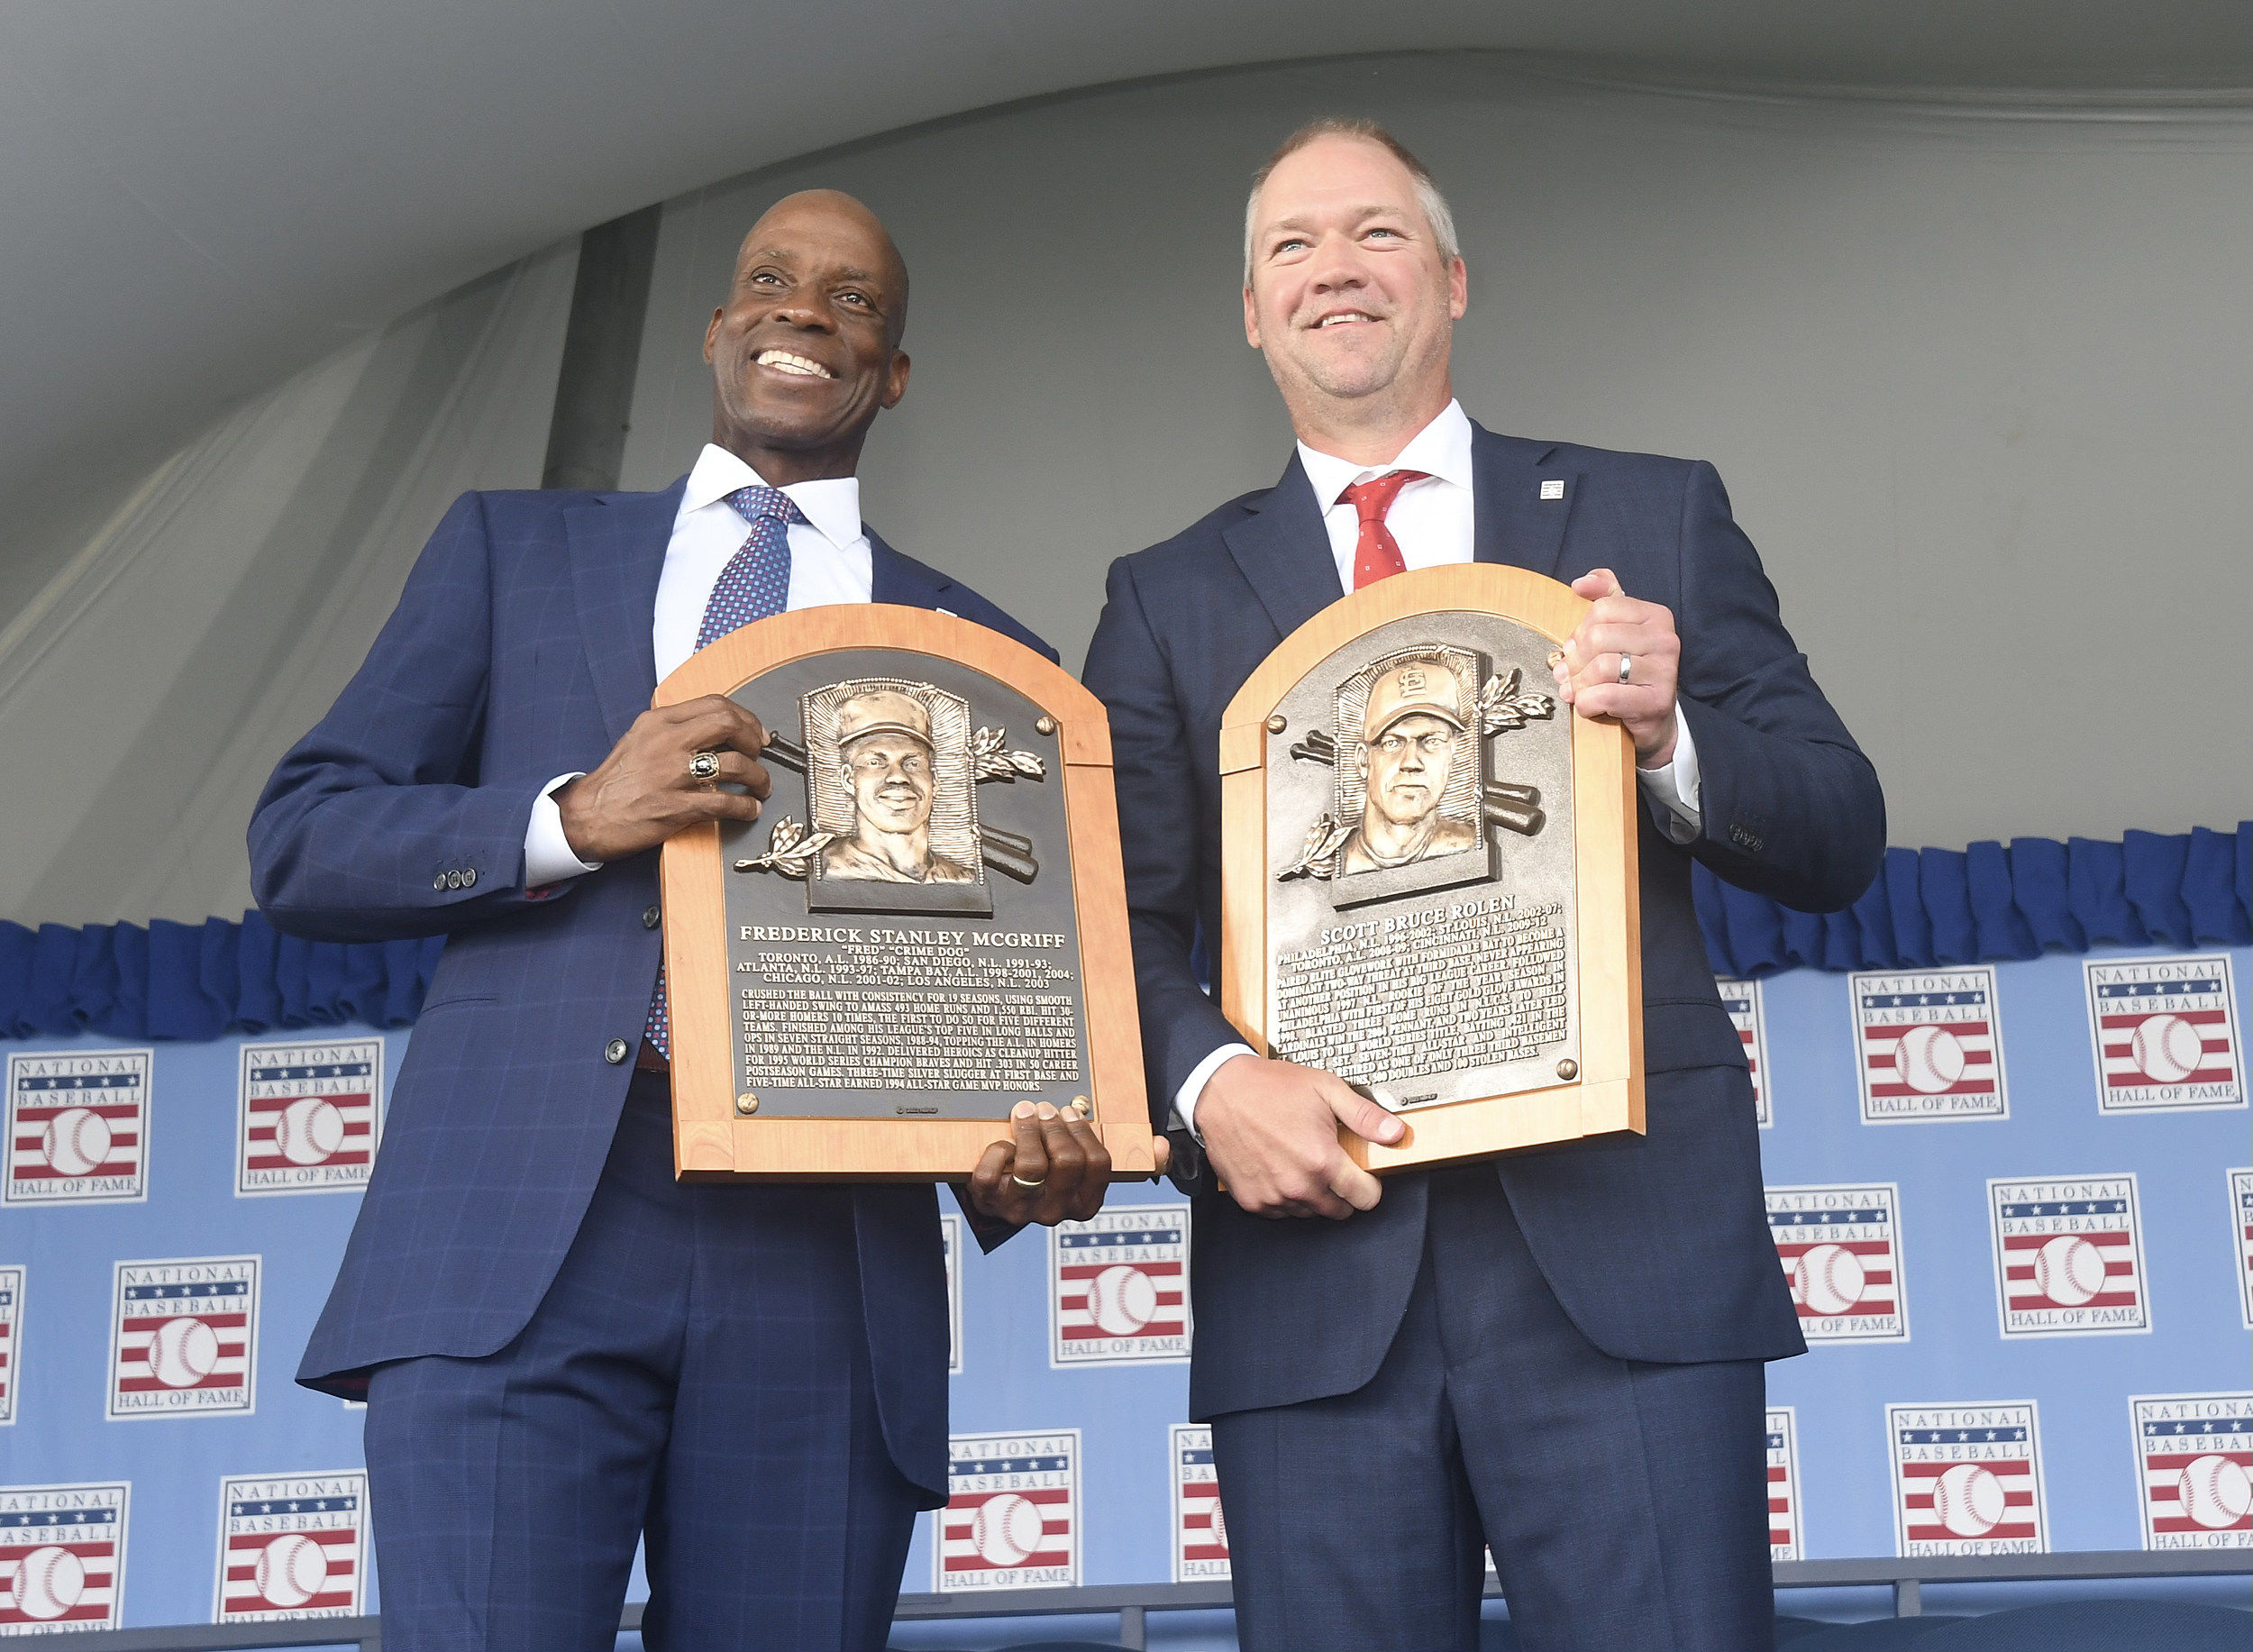 Tampa's Fred McGriff officially joins baseball Hall of Fame